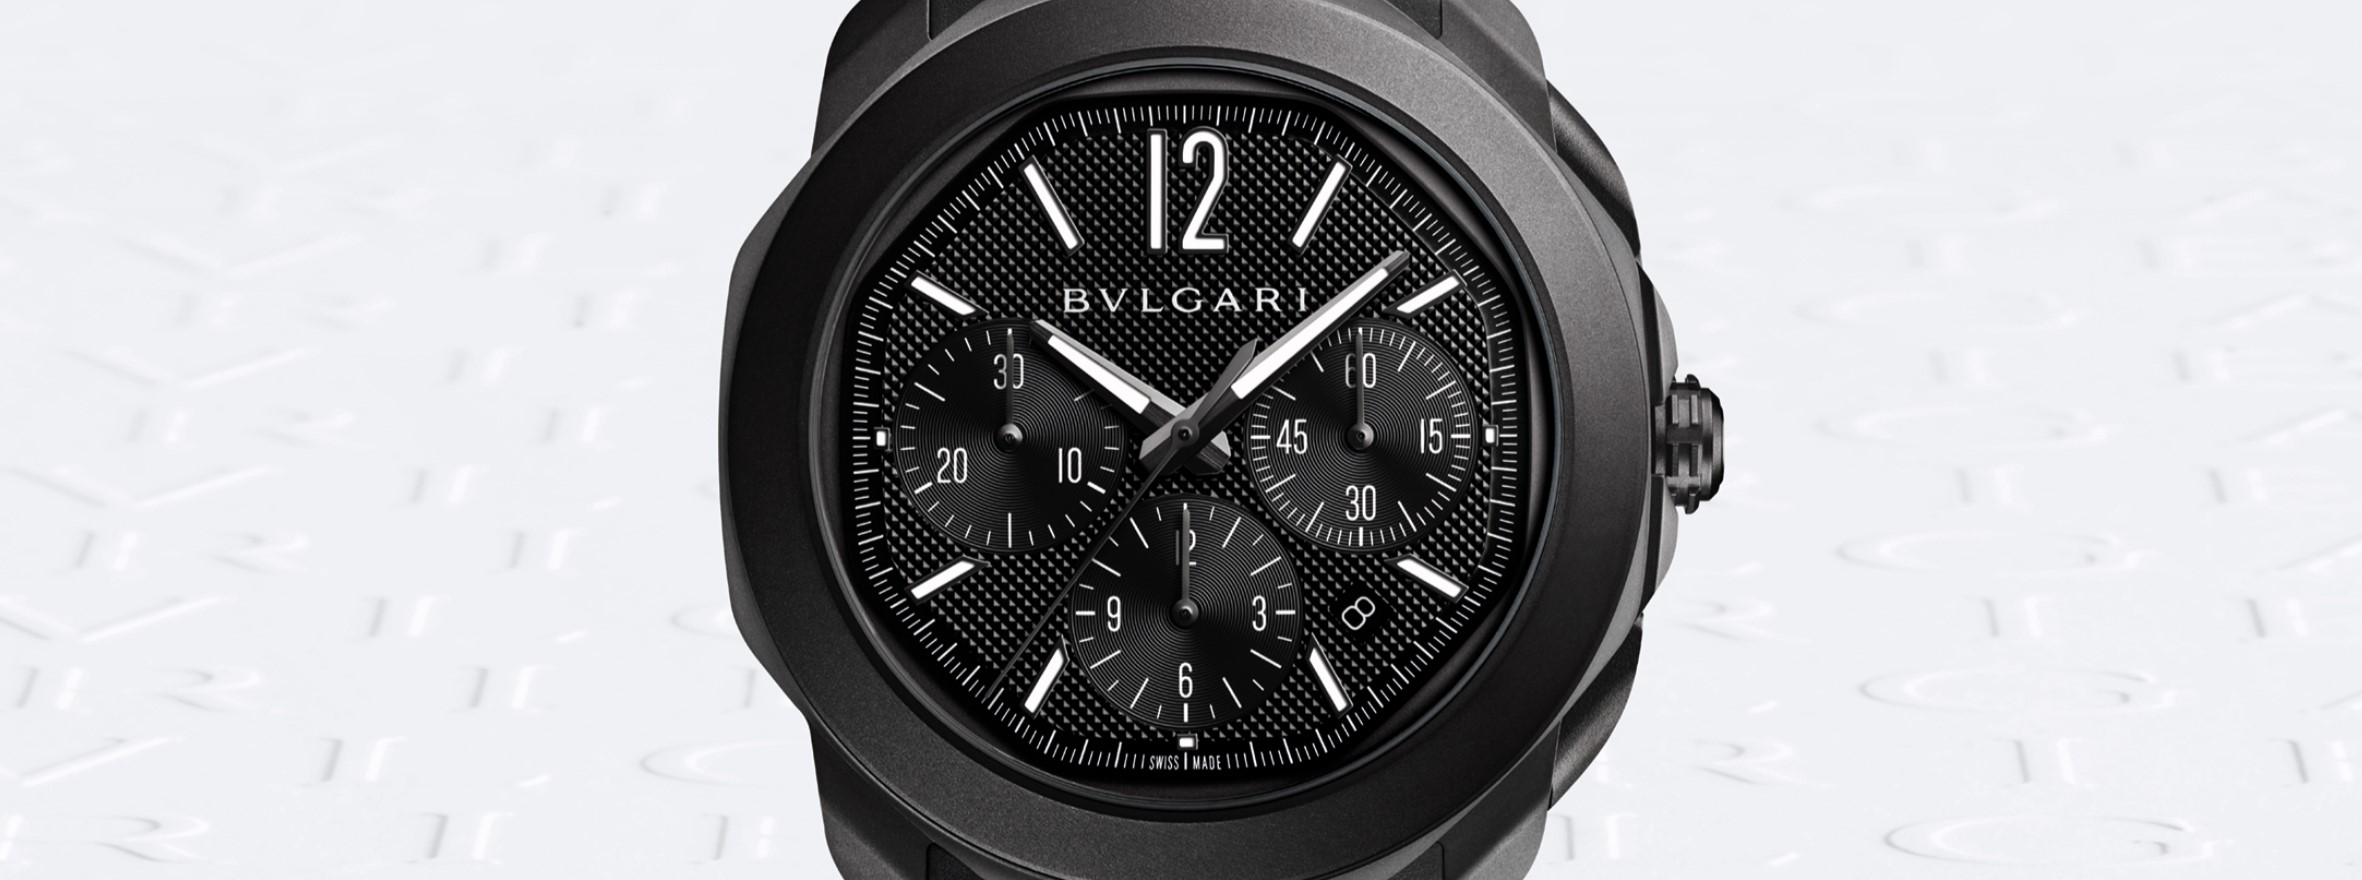 Bulgari’s Octo Roma Goes All-Black With New Automatic and Chronograph